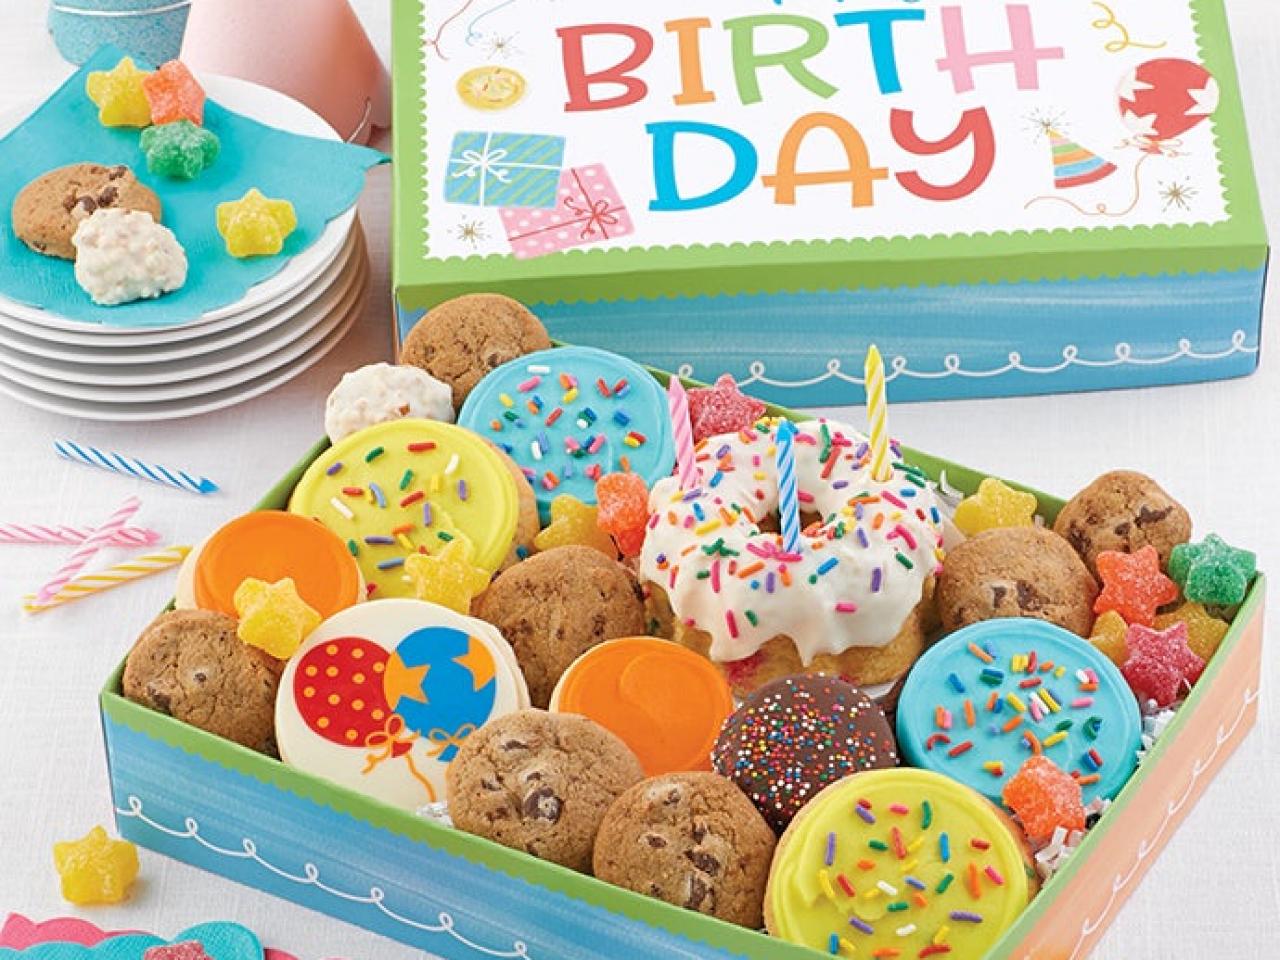 https://food.fnr.sndimg.com/content/dam/images/food/products/2022/2/7/rx_cheryls-cookies-happy-birthday-party-in-a-box.jpeg.rend.hgtvcom.1280.960.suffix/1644255515440.jpeg